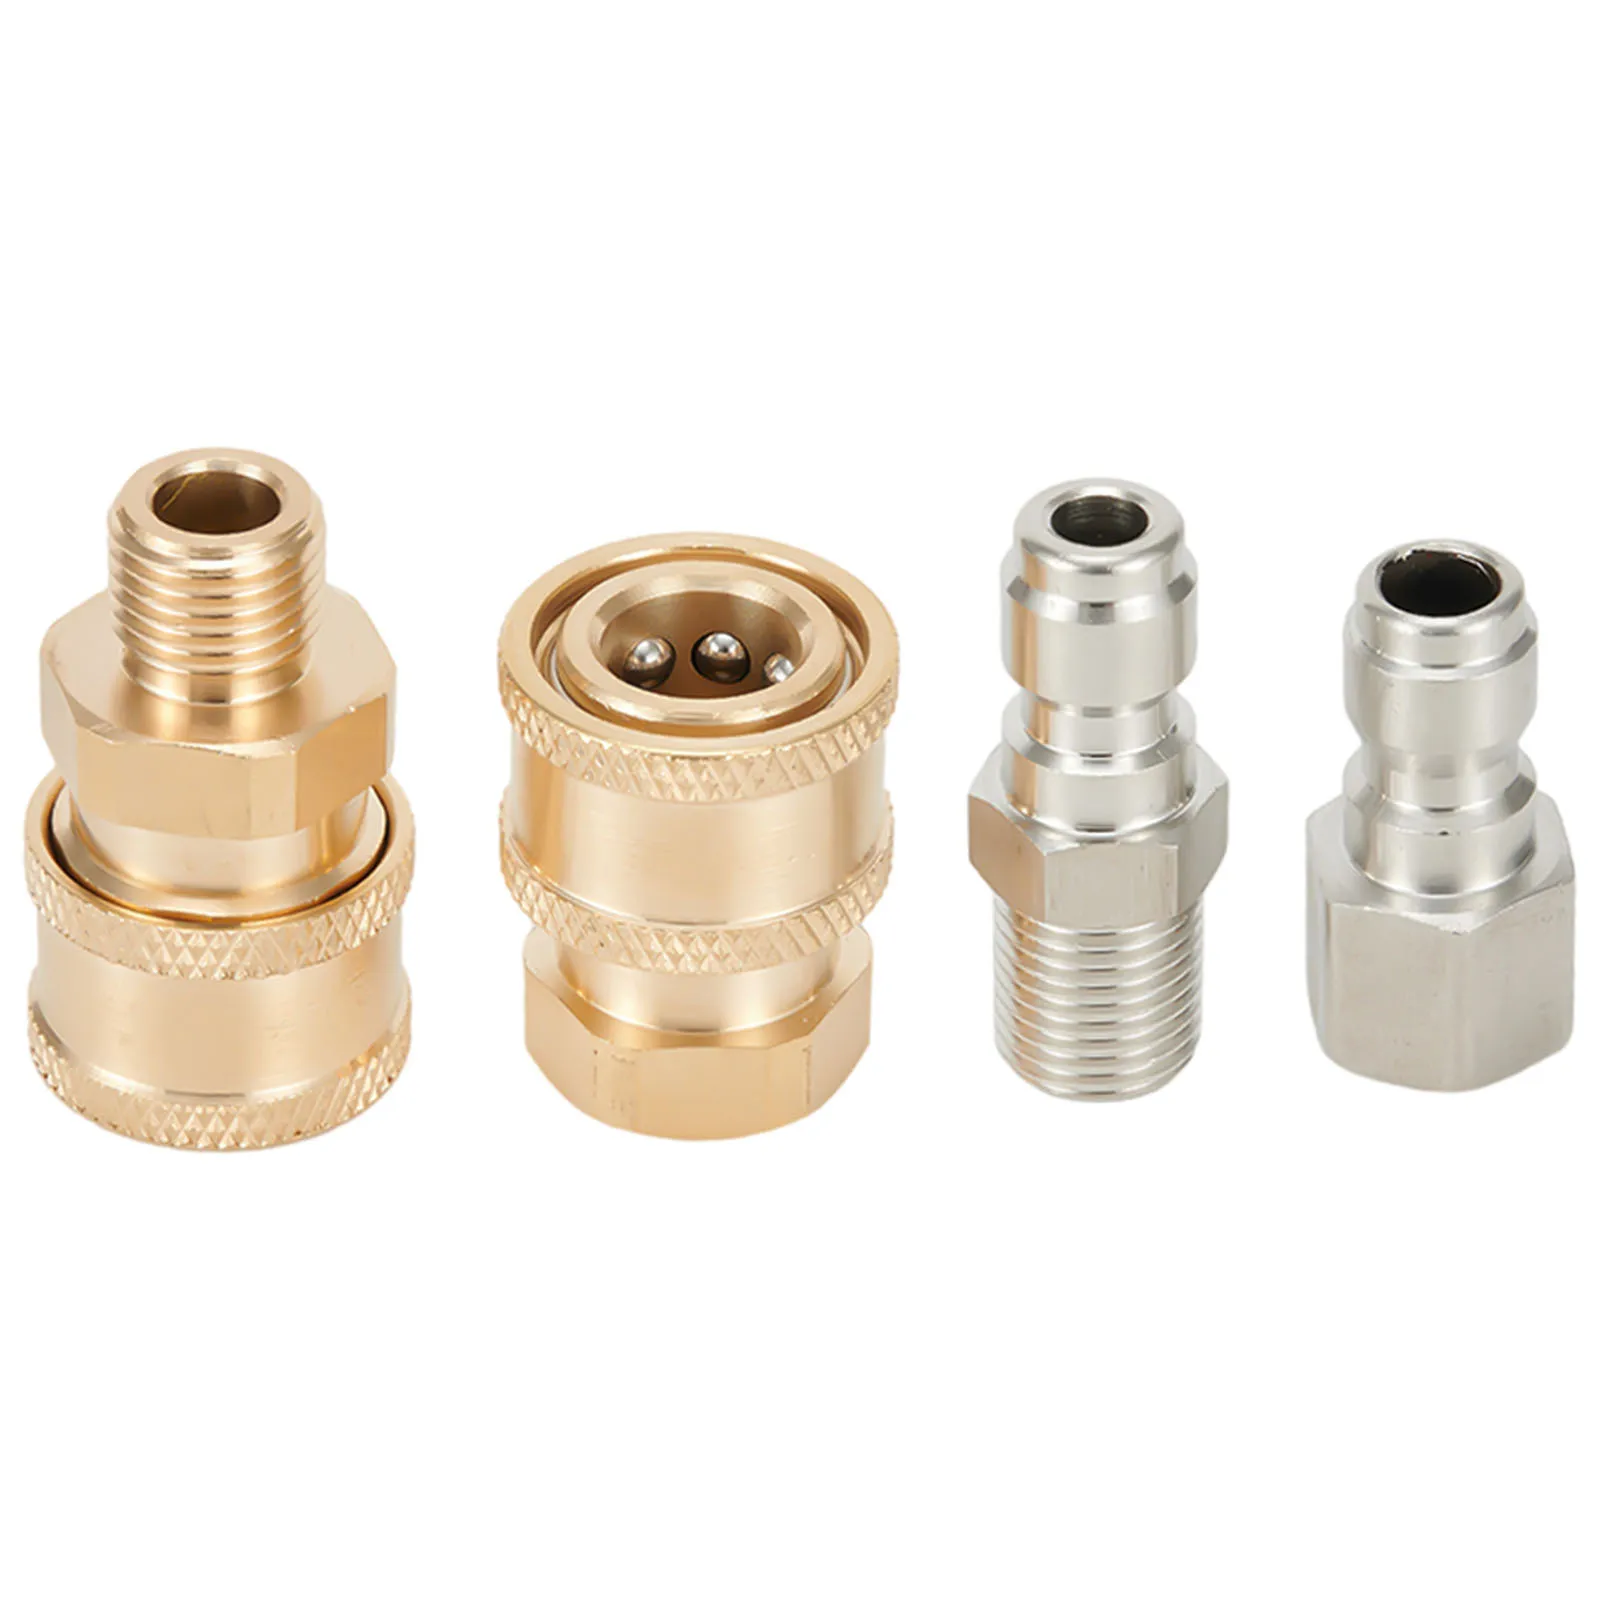 

Pressure Washer Connector Coupling Quick Release Adapter 1/4" Male Fitting Connection Car Washing Garden Joints